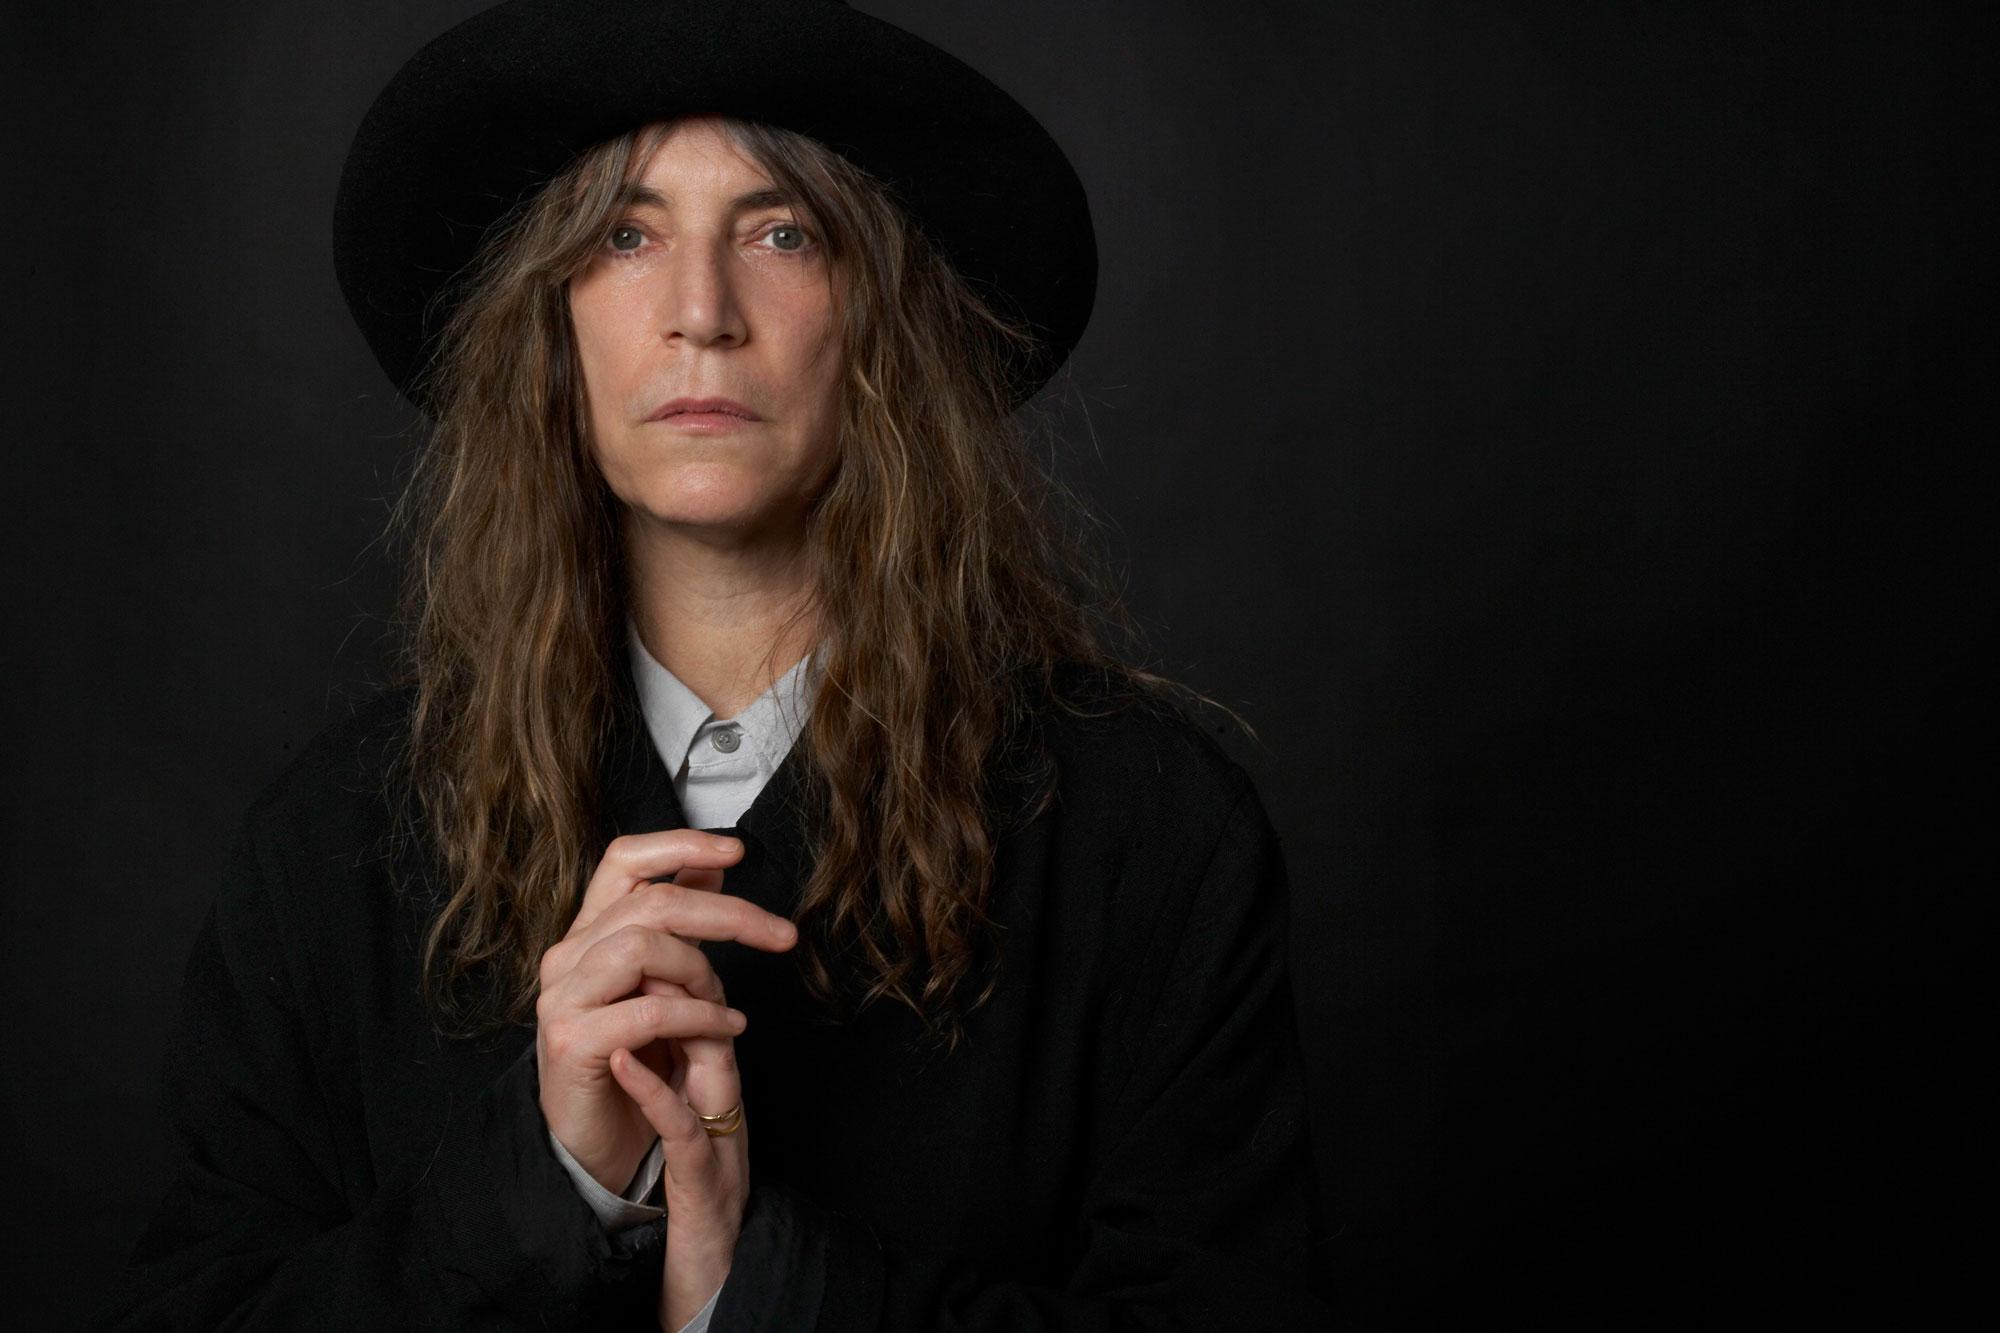 Punk legend Patti Smith sang songs and read passages from her autobiography Just Kids at an event at Spreckels Theatre. ArtPower! at UC San Diego.